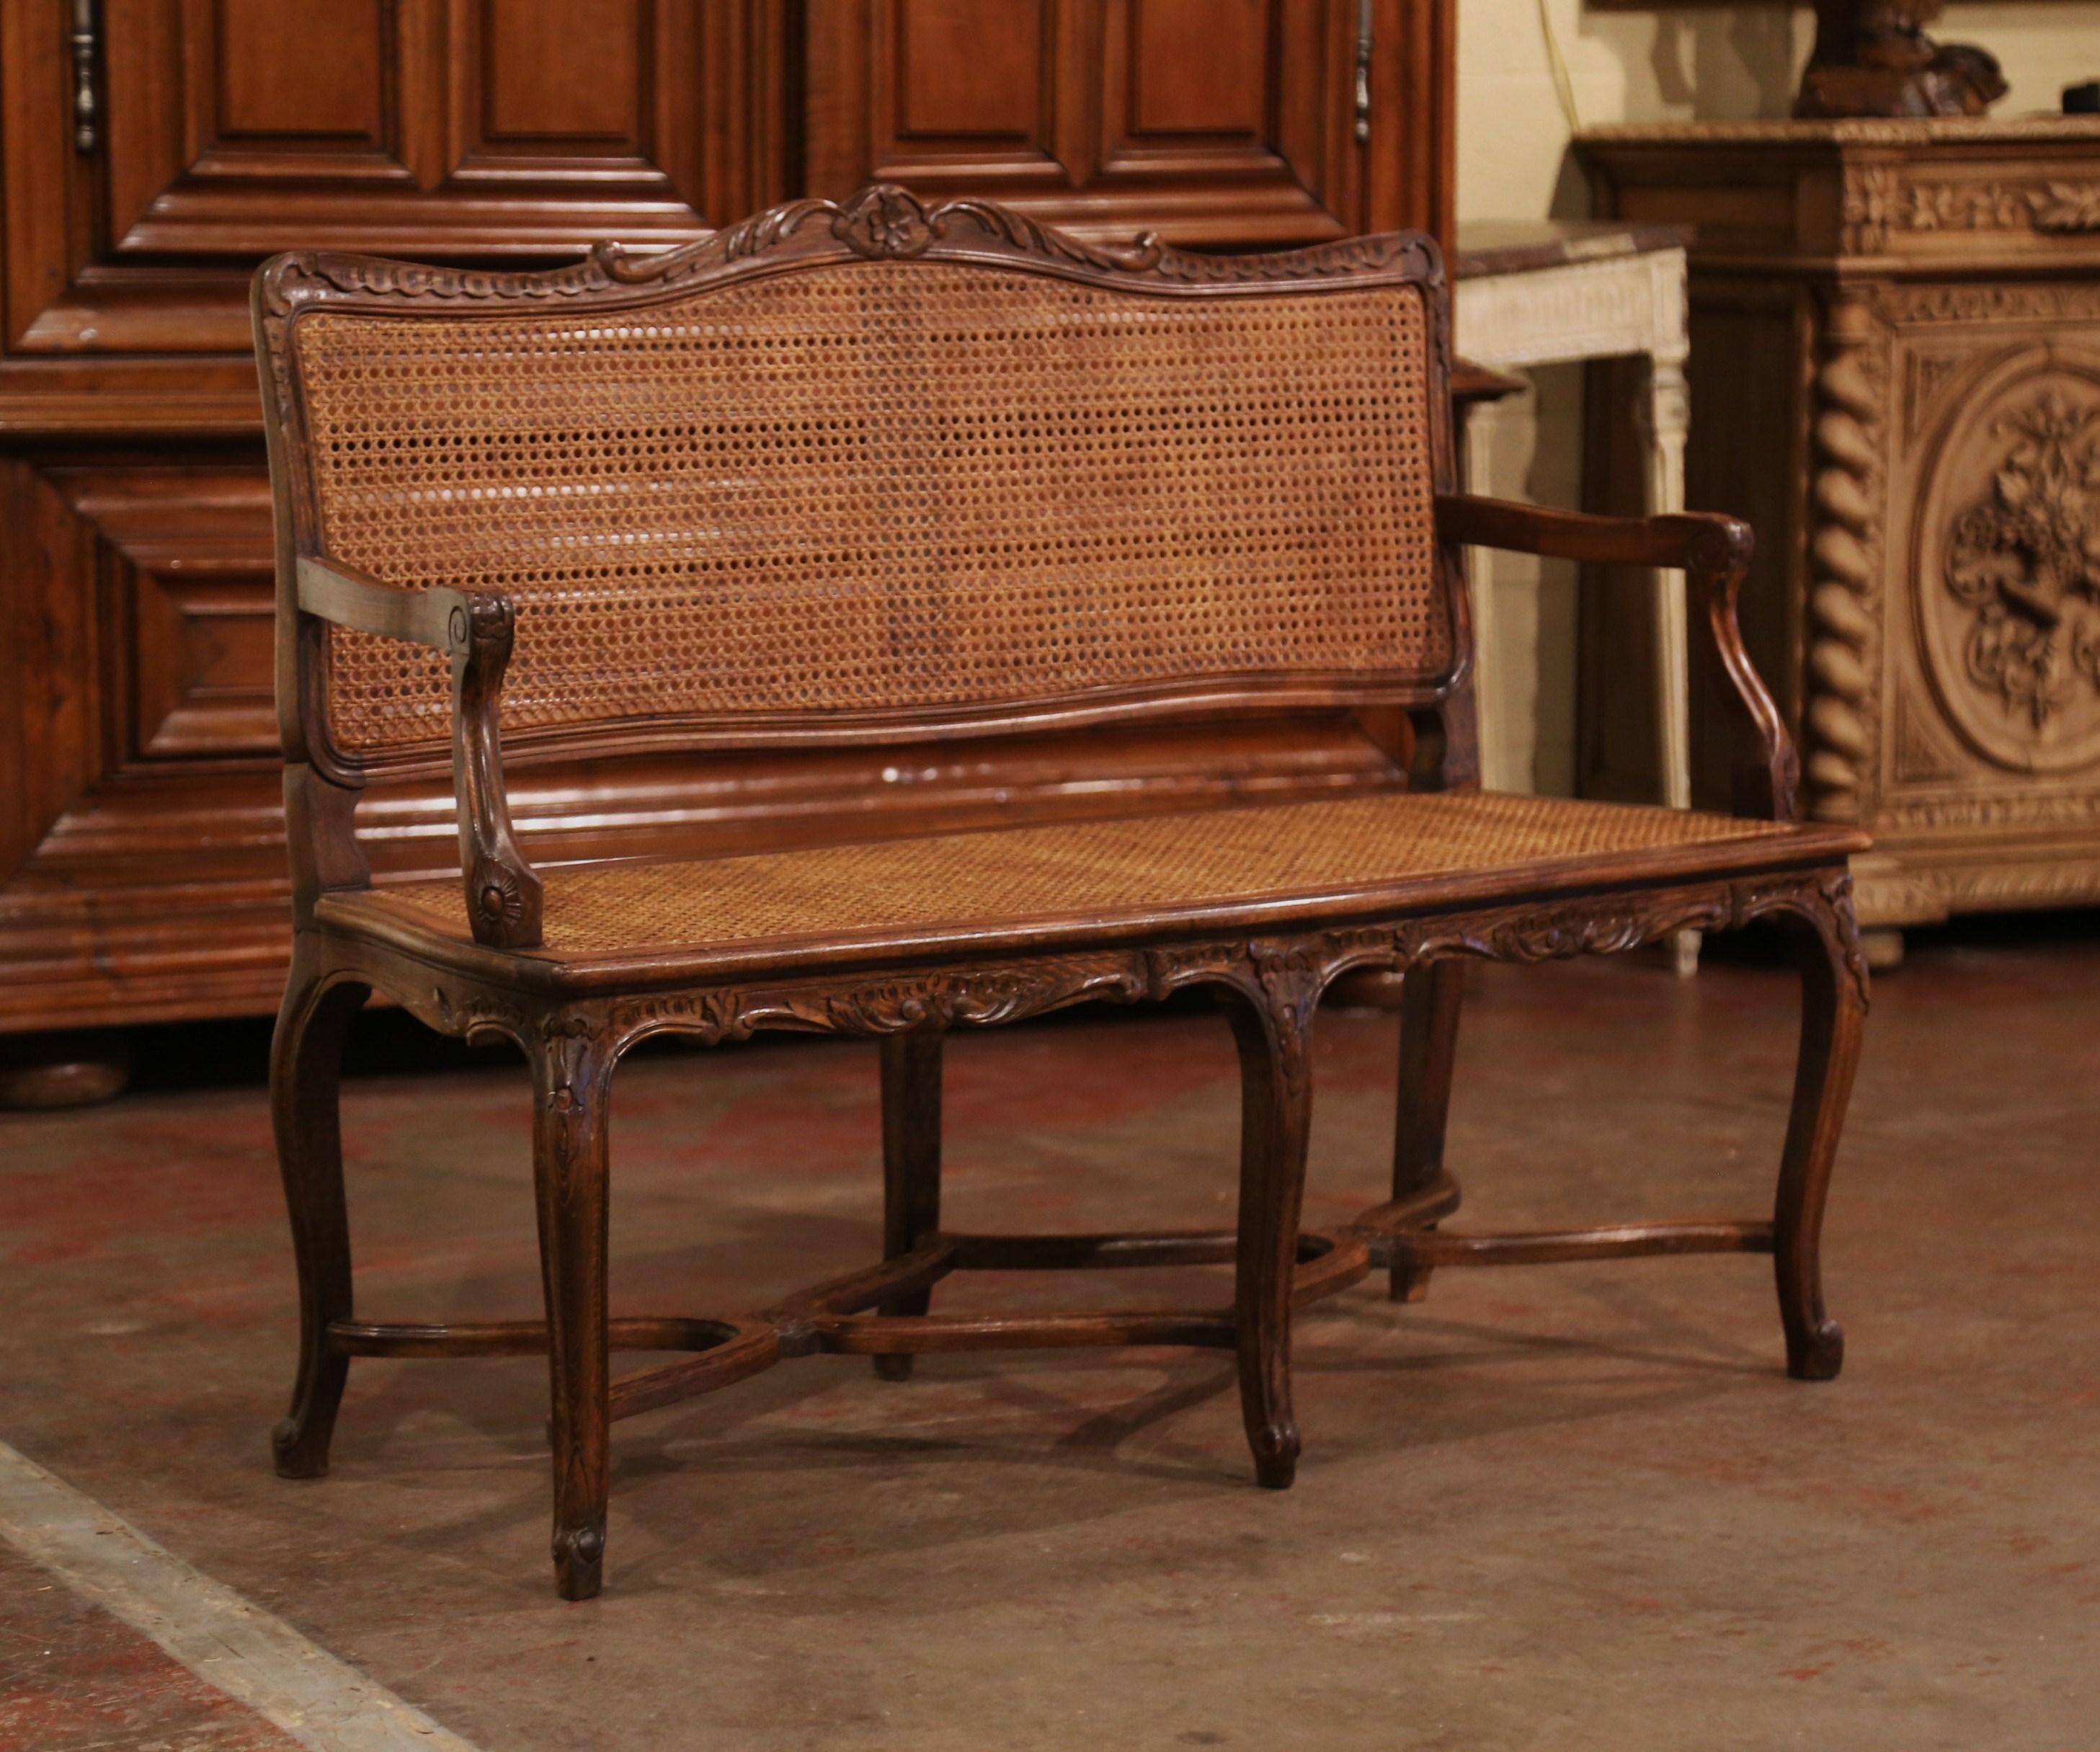 20th Century Mid-Century French Louis XV Carved Beech Wood and Cane Six-Leg Settee Bench